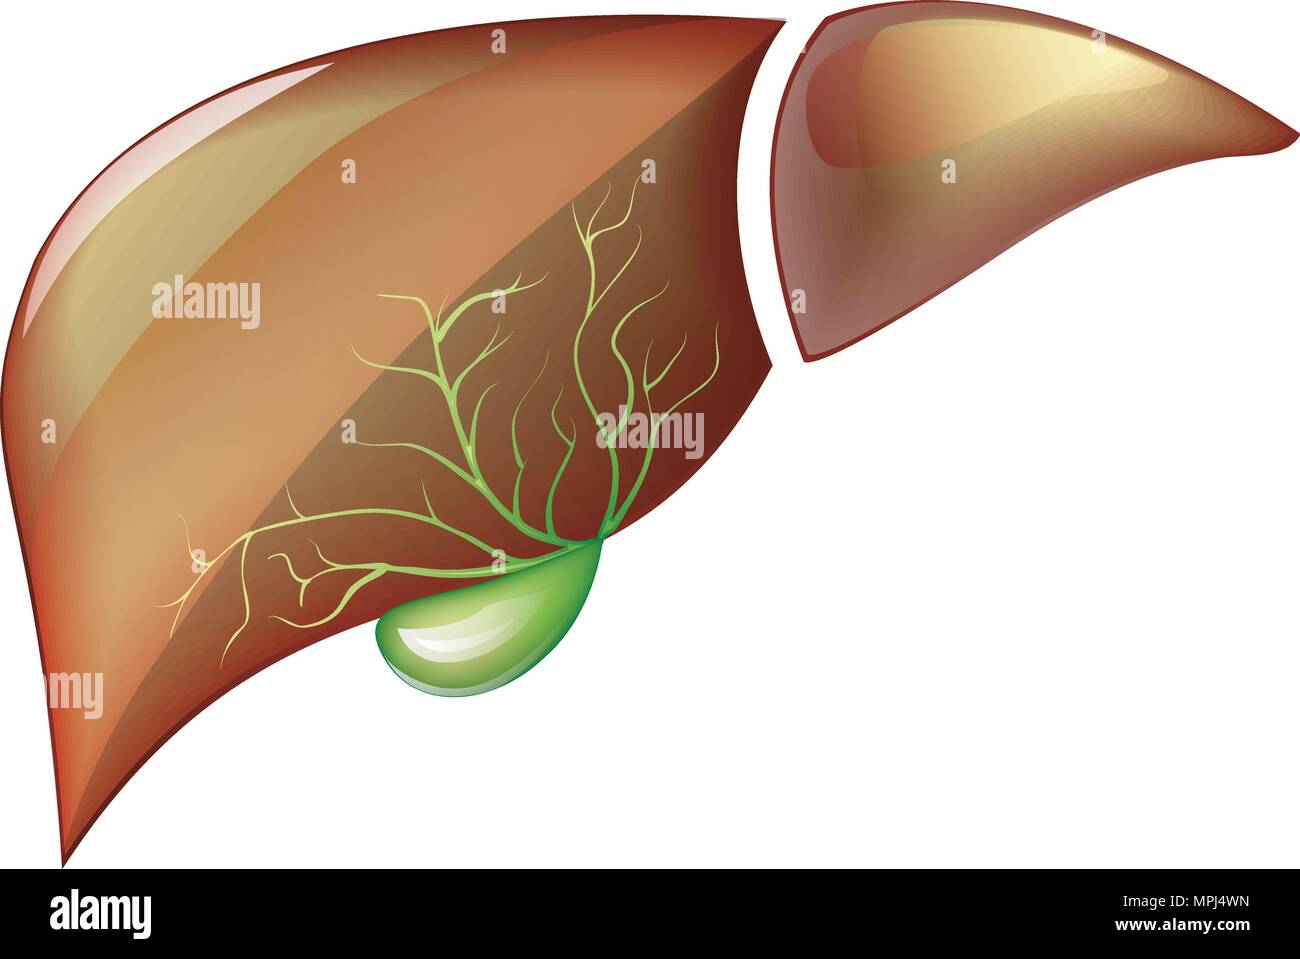 ILLUSTRATION OF THE HEALTHY HUMAN LIVER. Vector. Stock Vector